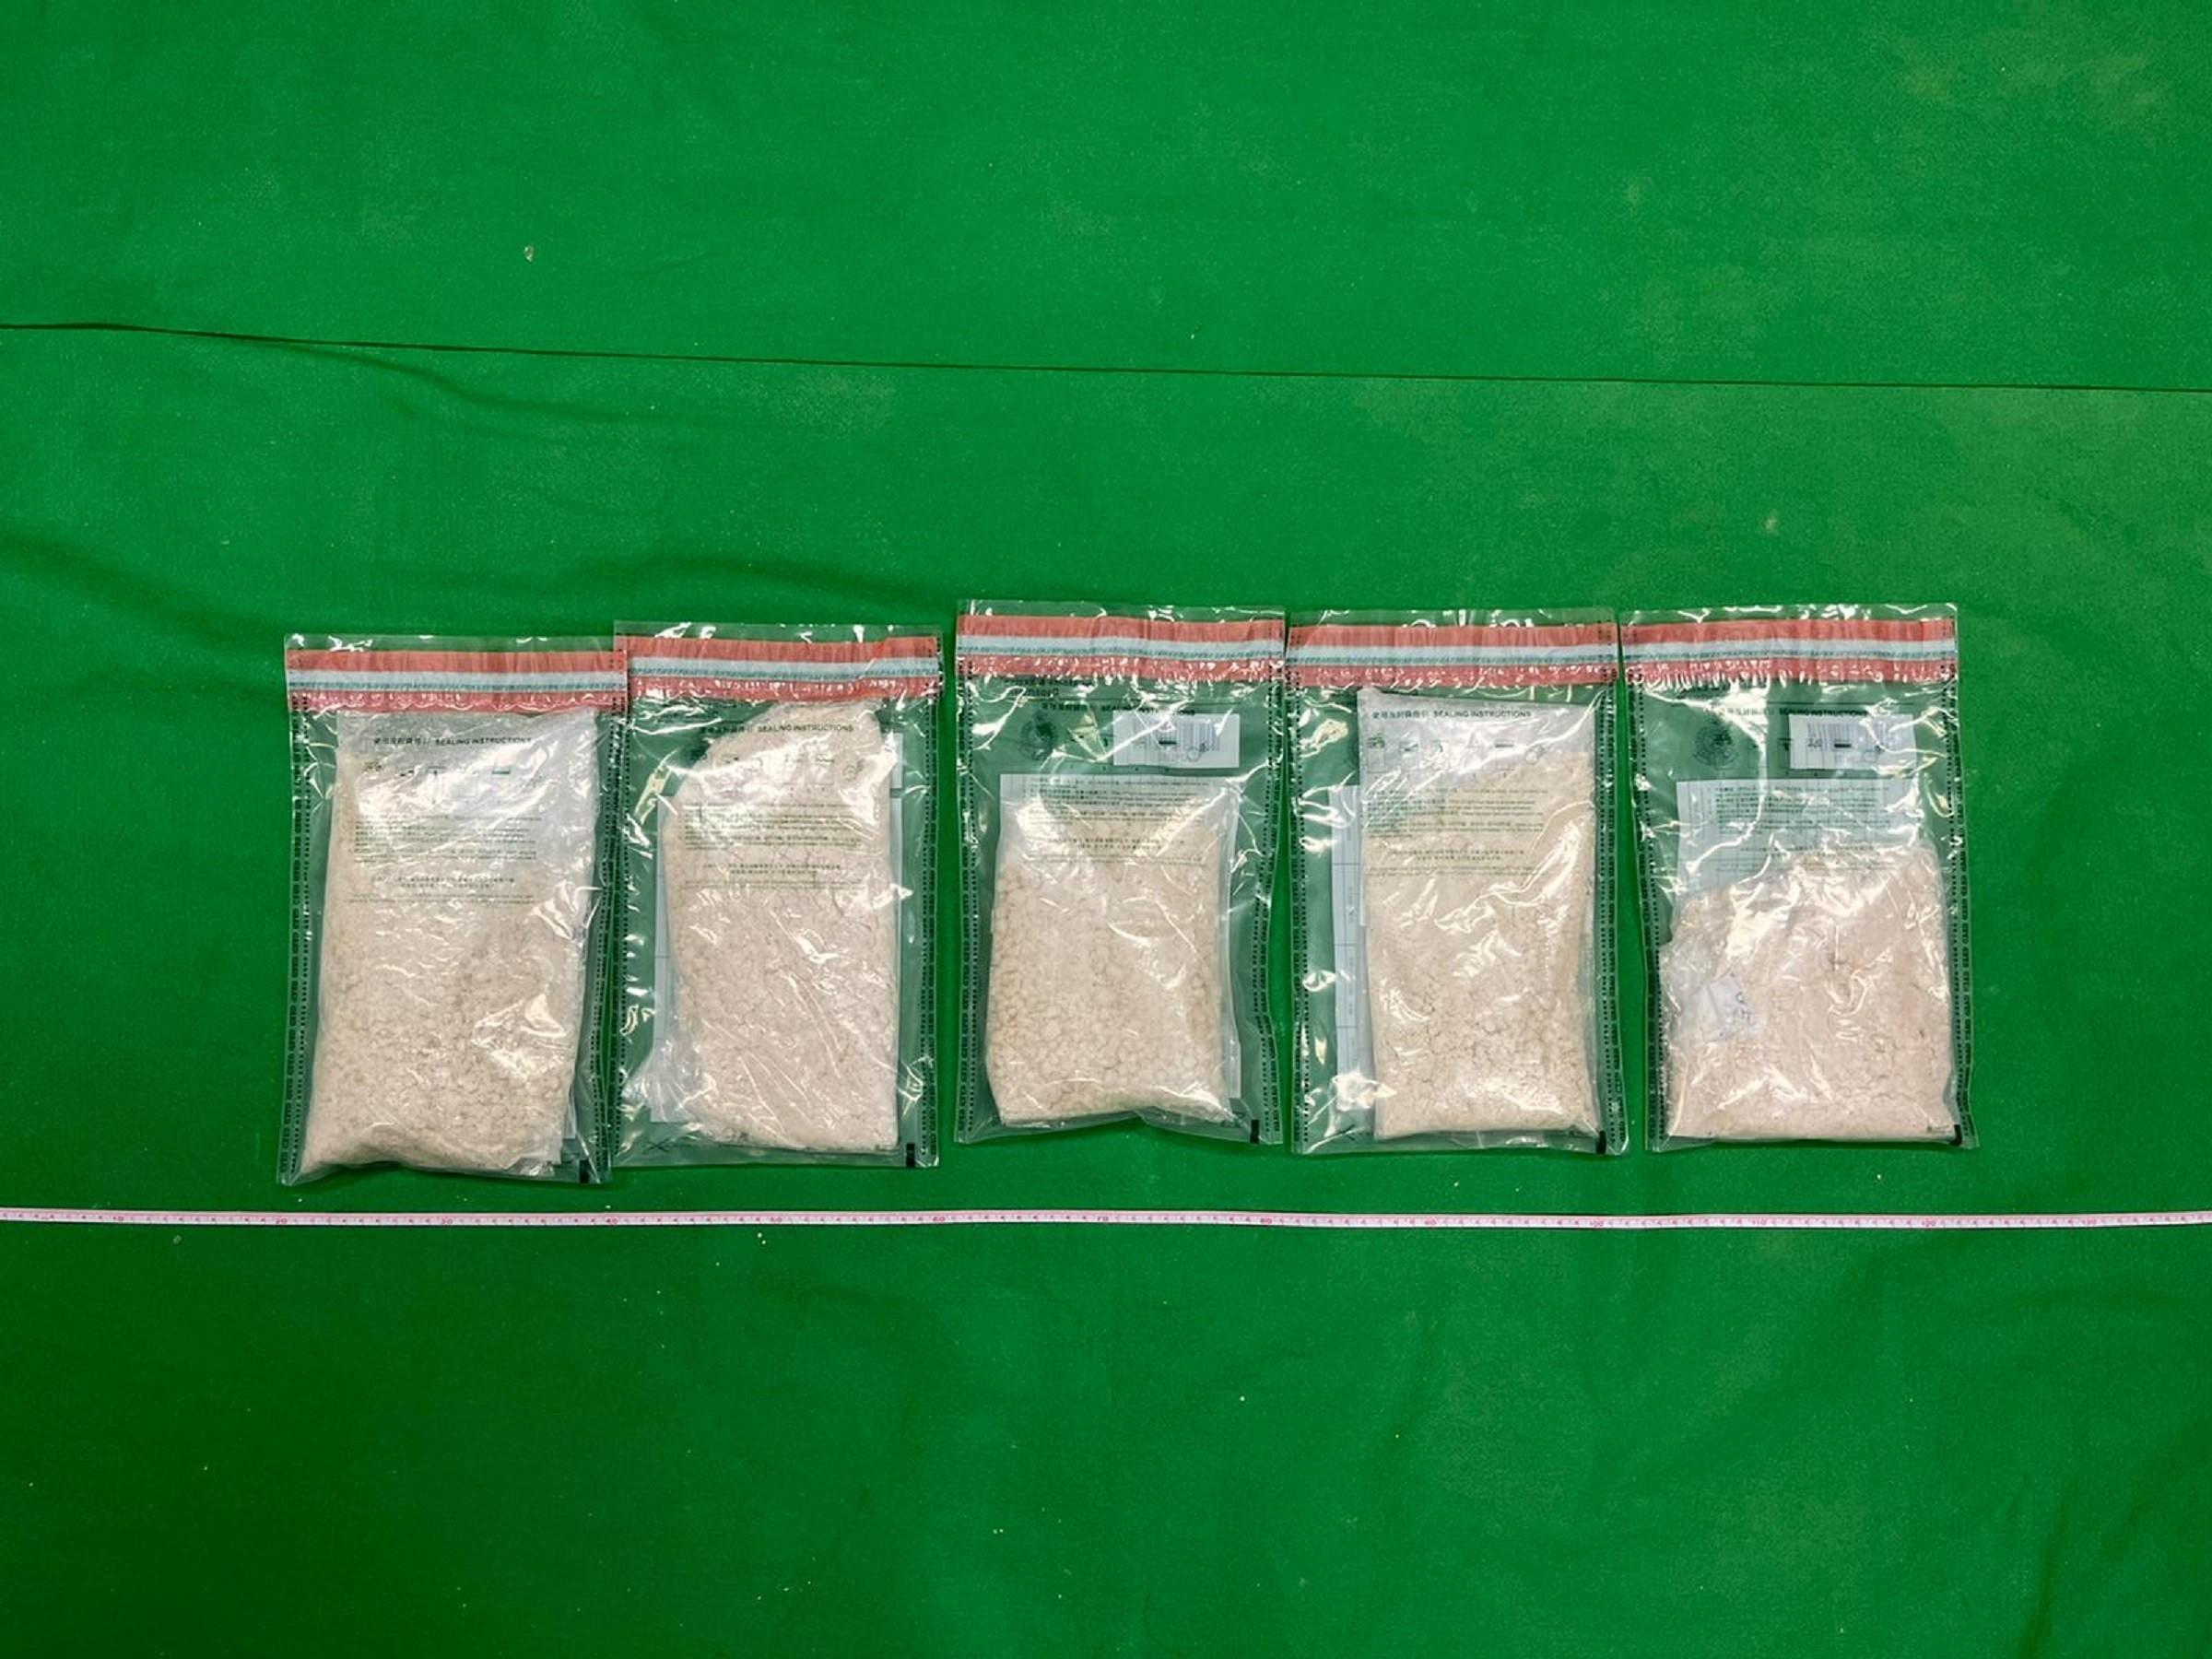 Hong Kong Customs seized about 20 kilograms of suspected heroin and about 2.4kg of suspected cocaine in To Kwa Wan and at Hong Kong International Airport in the past two days (July 21 and 22). The estimated market value was about $18.8 million and about $2.2 million respectively. Photo shows the suspected cocaine seized. 